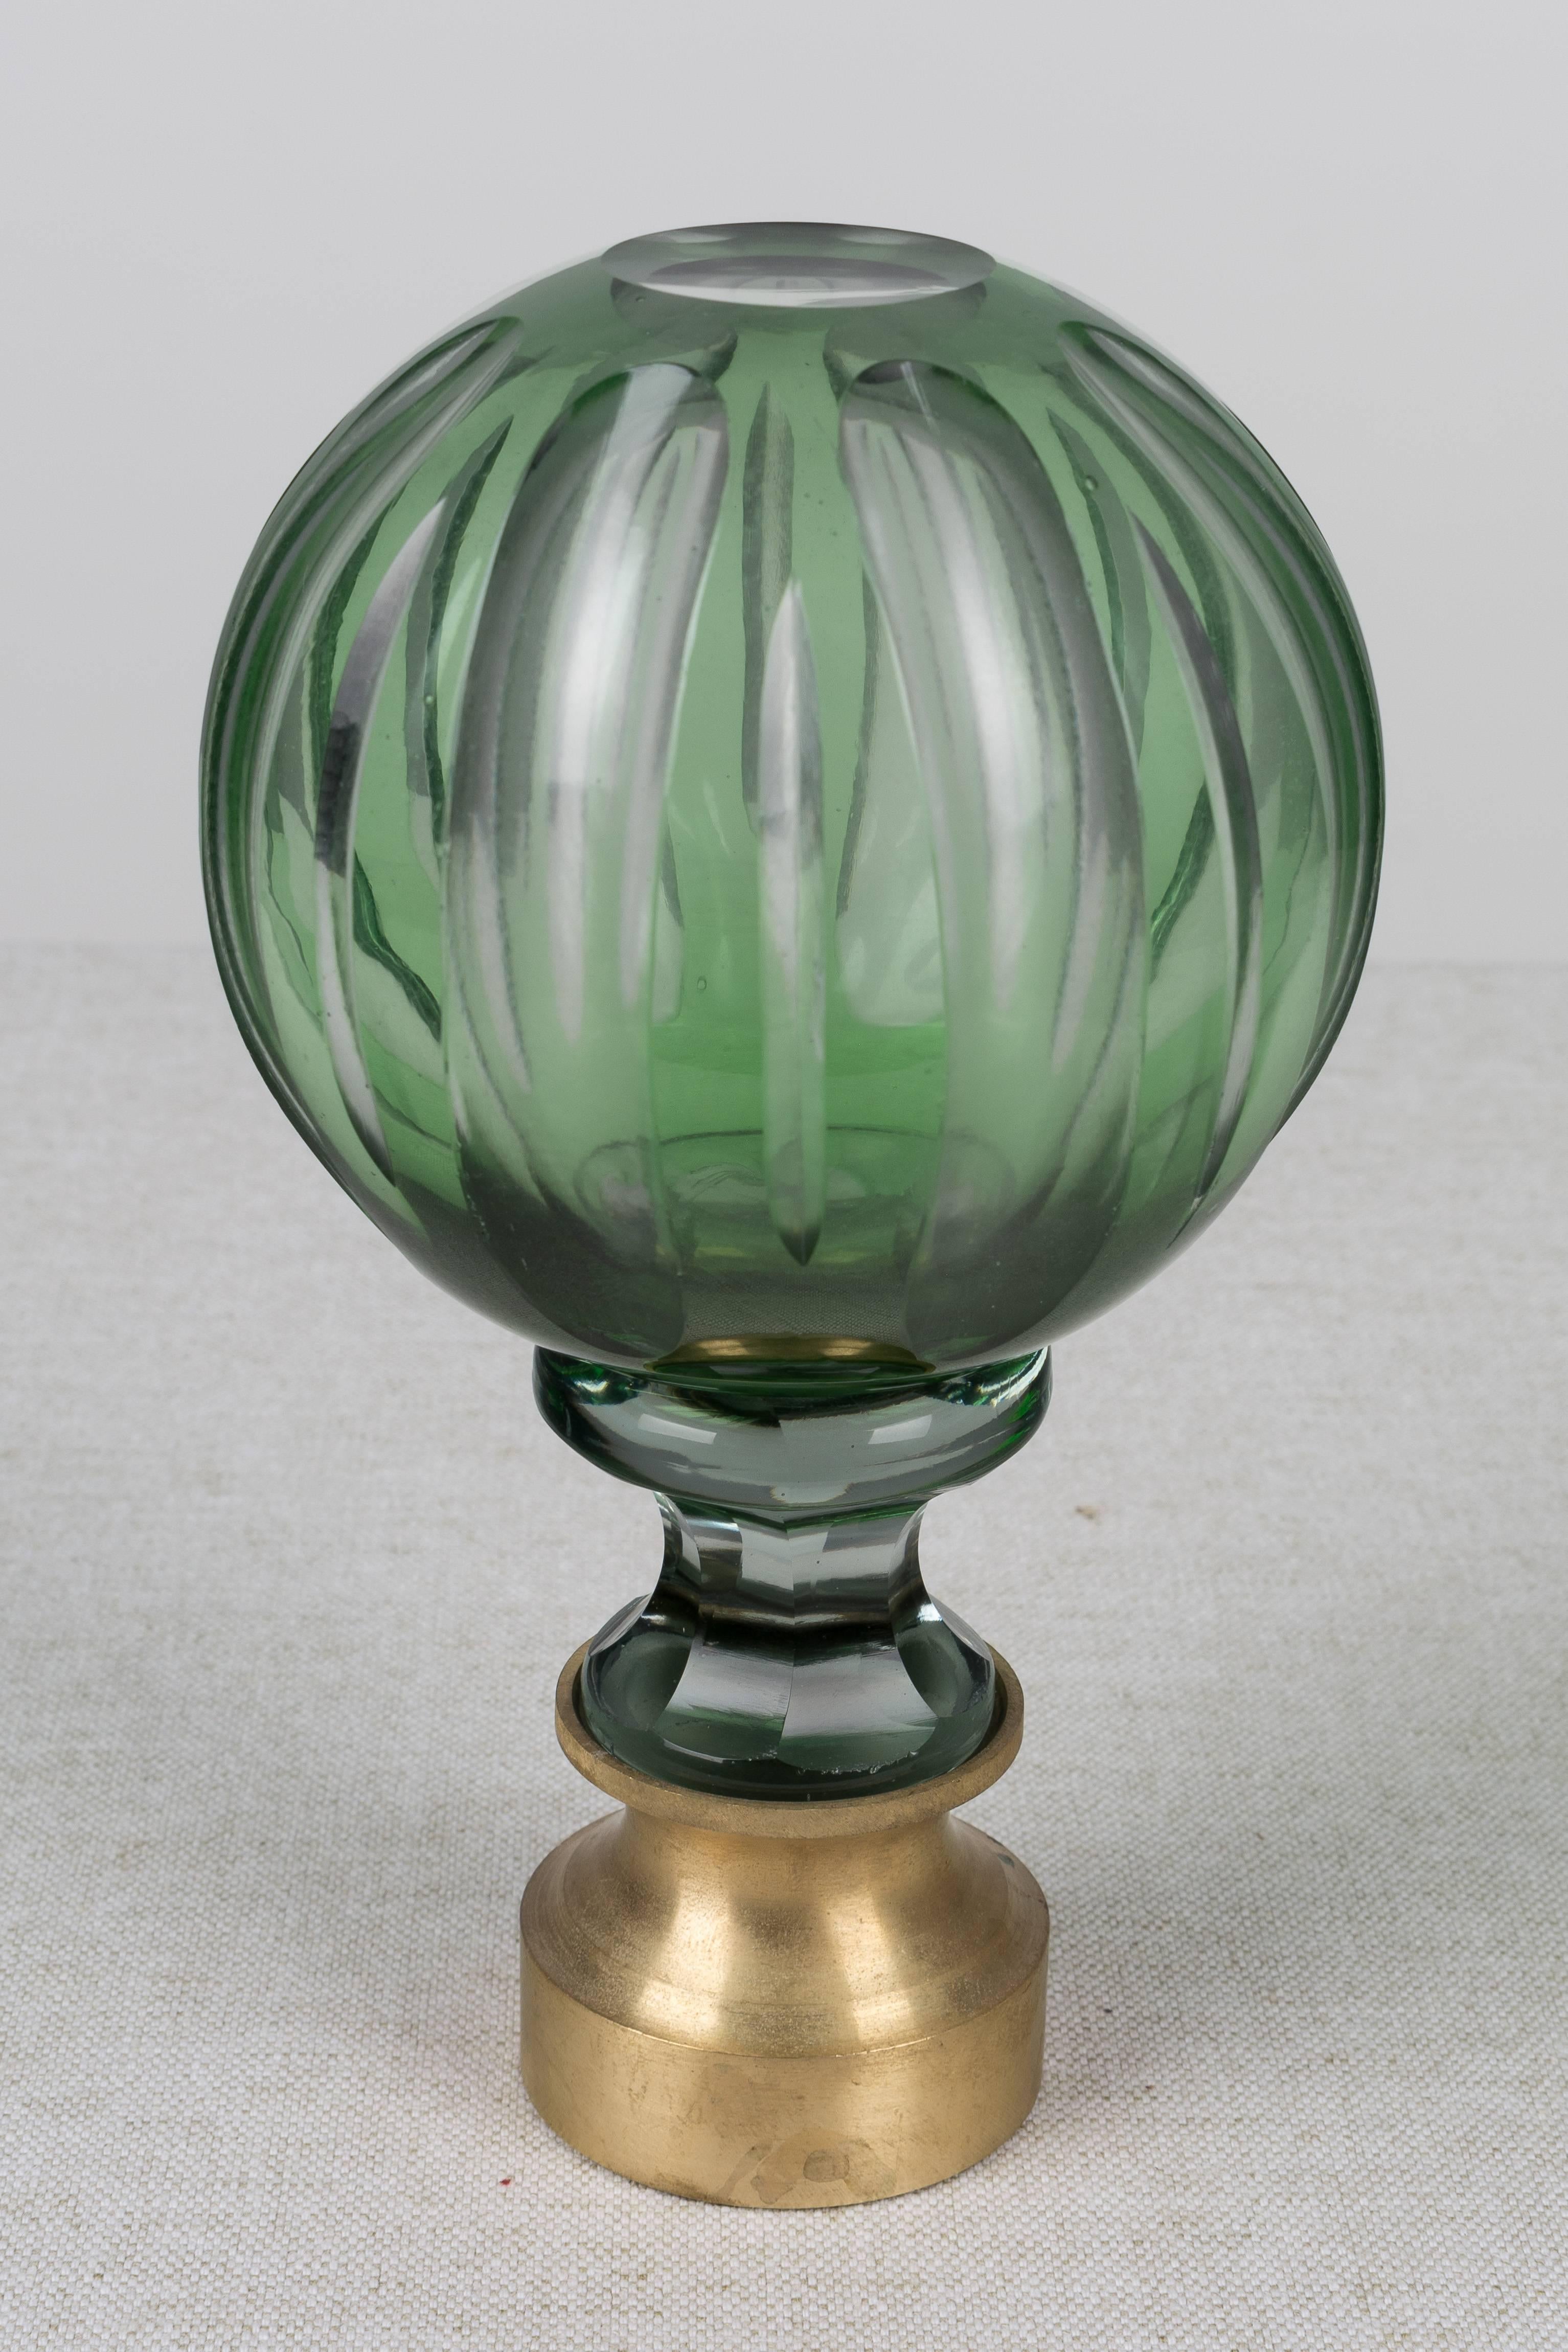 A 19th century French crystal newel post finial or boule d'escalier. Made of two layers of cased glass with the green glass surface cut back to the clear glass underneath. Brass hardware base. These wonderful finials were used as decorative elements